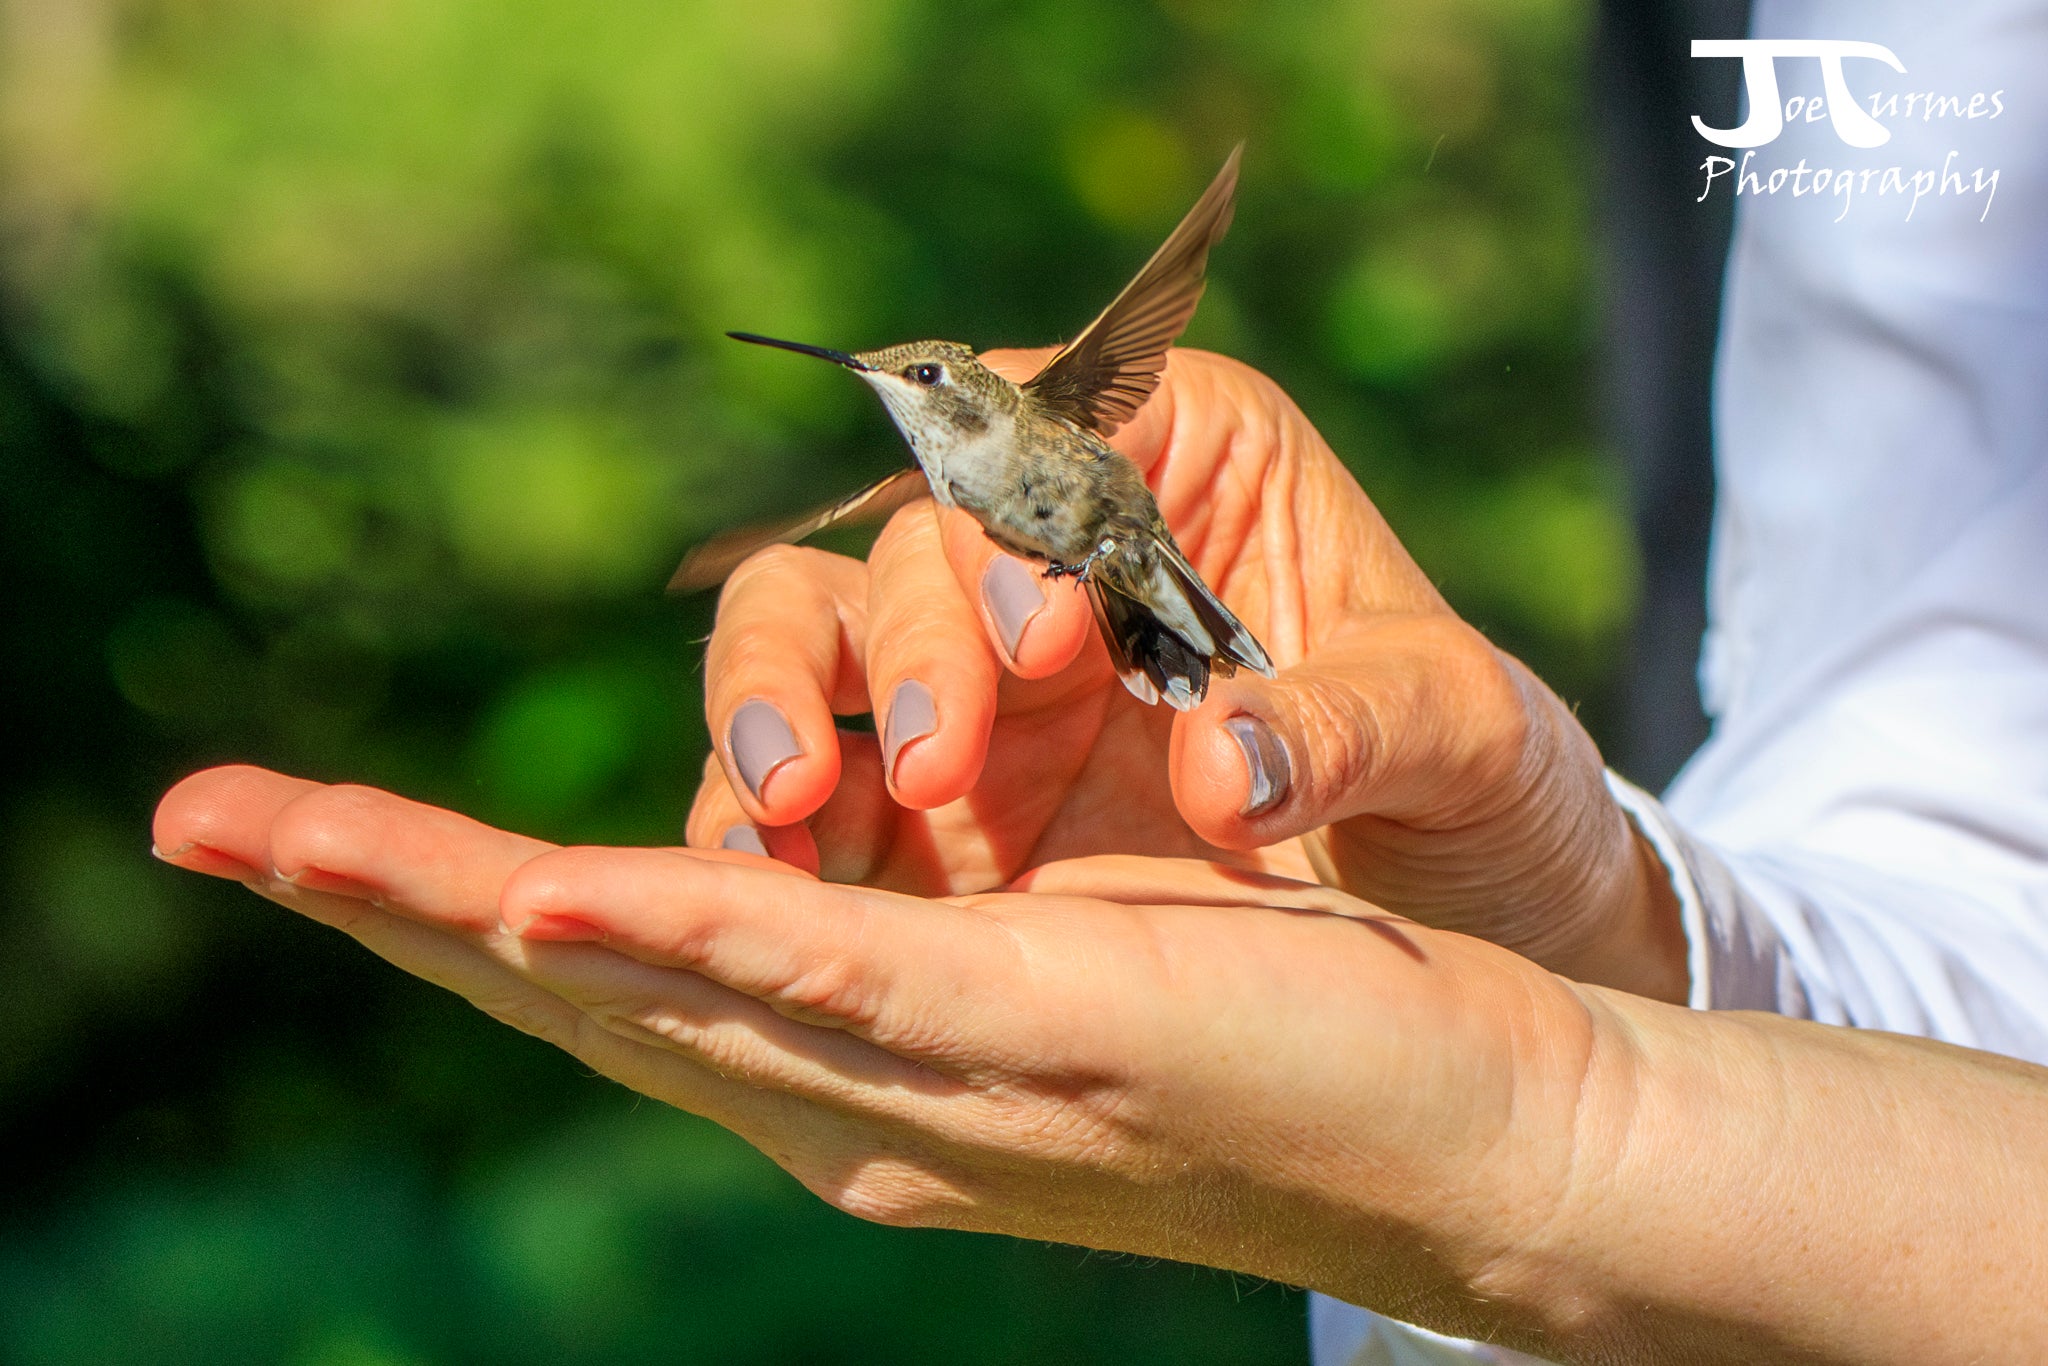 a small grayish hummingbird hovers in flight just over a person's outstretched palm. The photo was taken the moment the bird took off from the person's hand